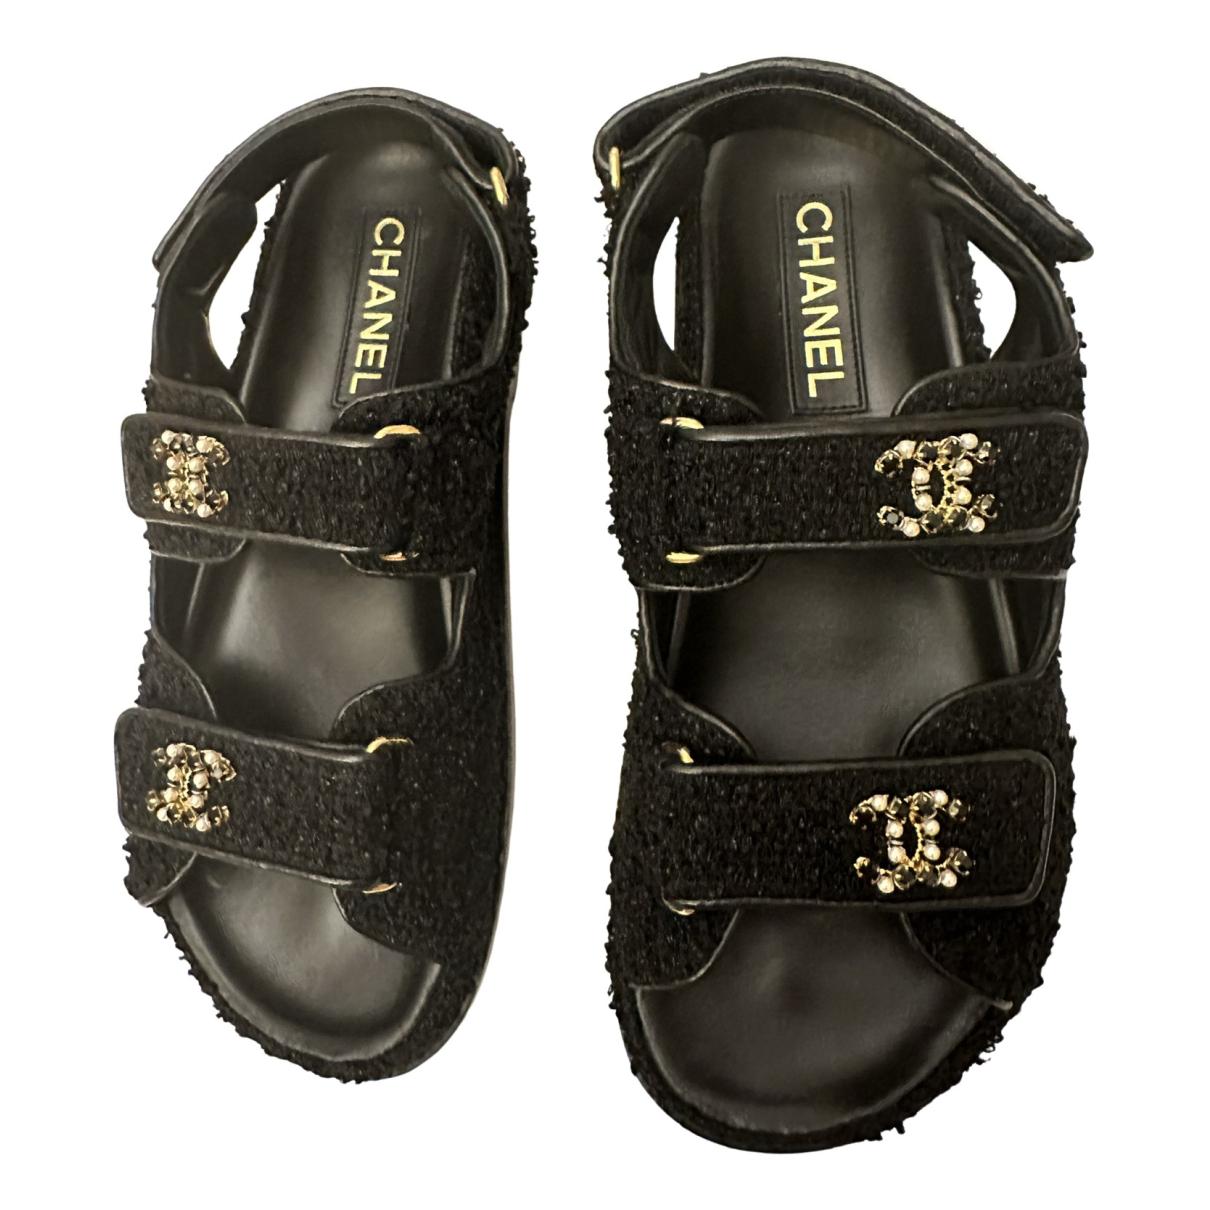 Leather sandal Chanel Black size 40 EU in Leather - 33605665